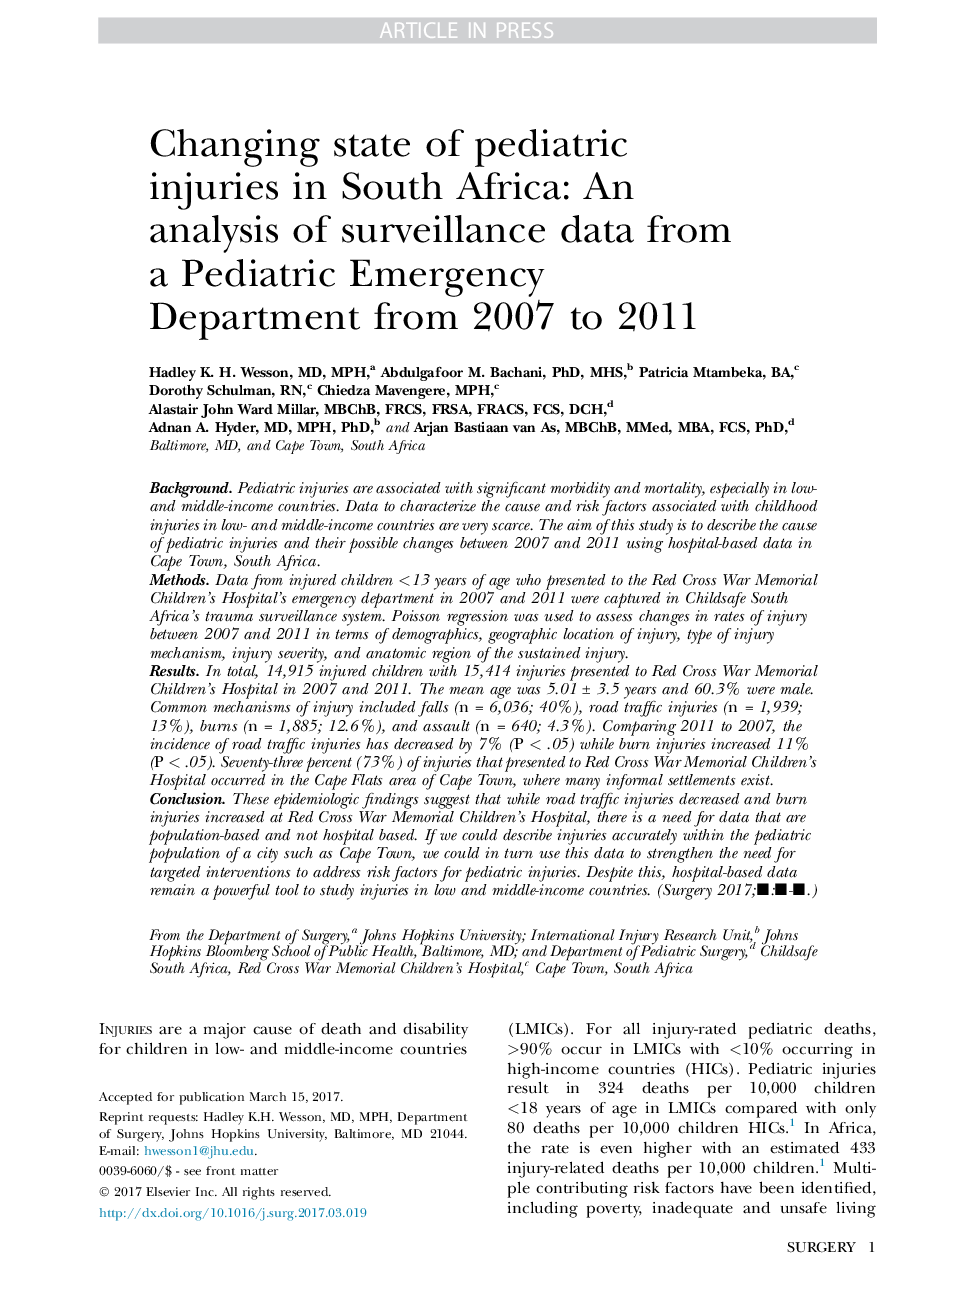 Changing state of pediatric injuries in South Africa: An analysis of surveillance data from a Pediatric Emergency Department from 2007 to 2011